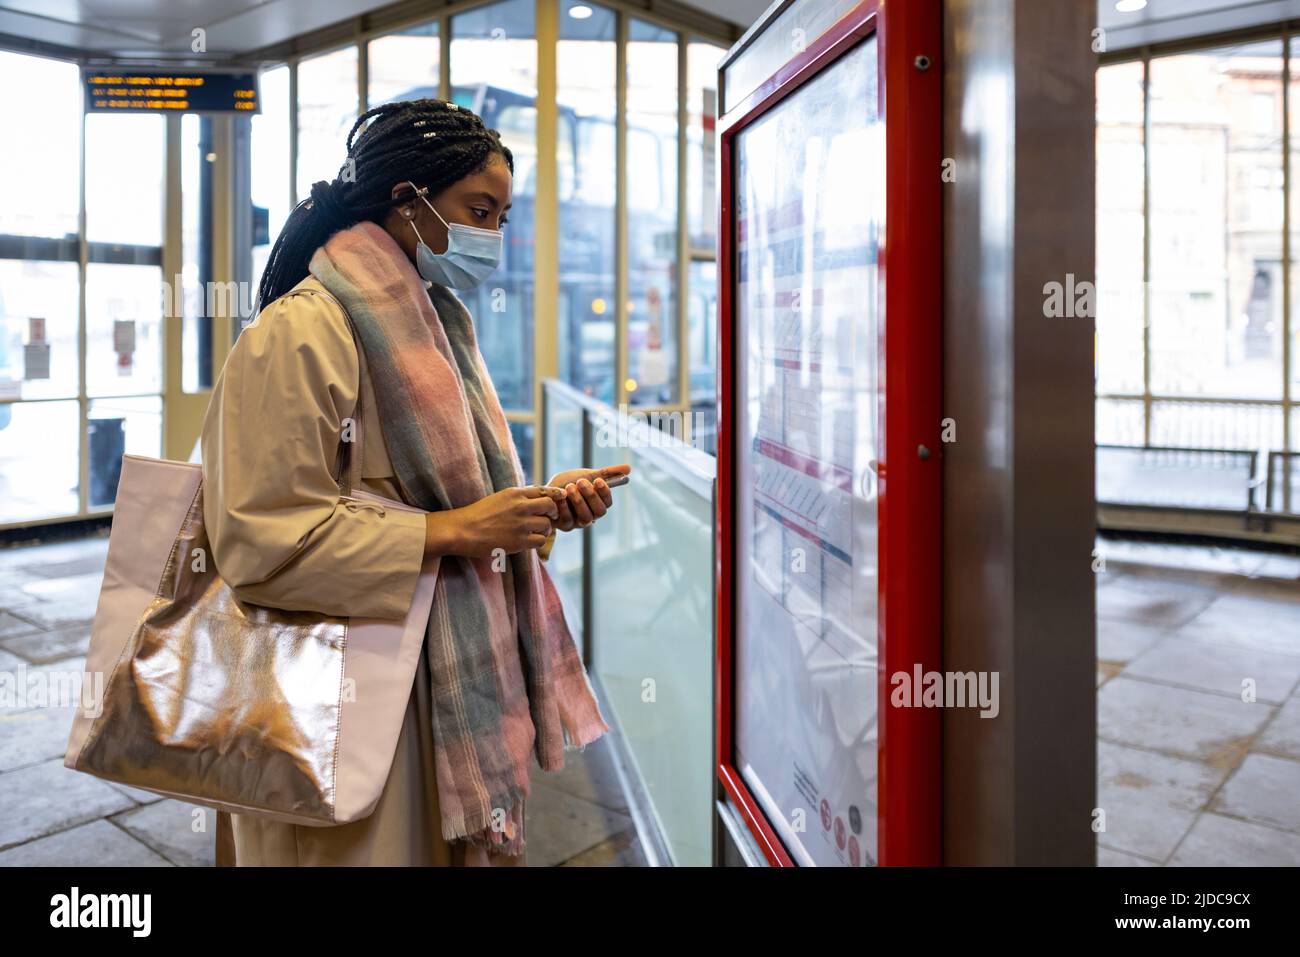 Woman with face covering holding phone and looking at bus timetable Stock Photo